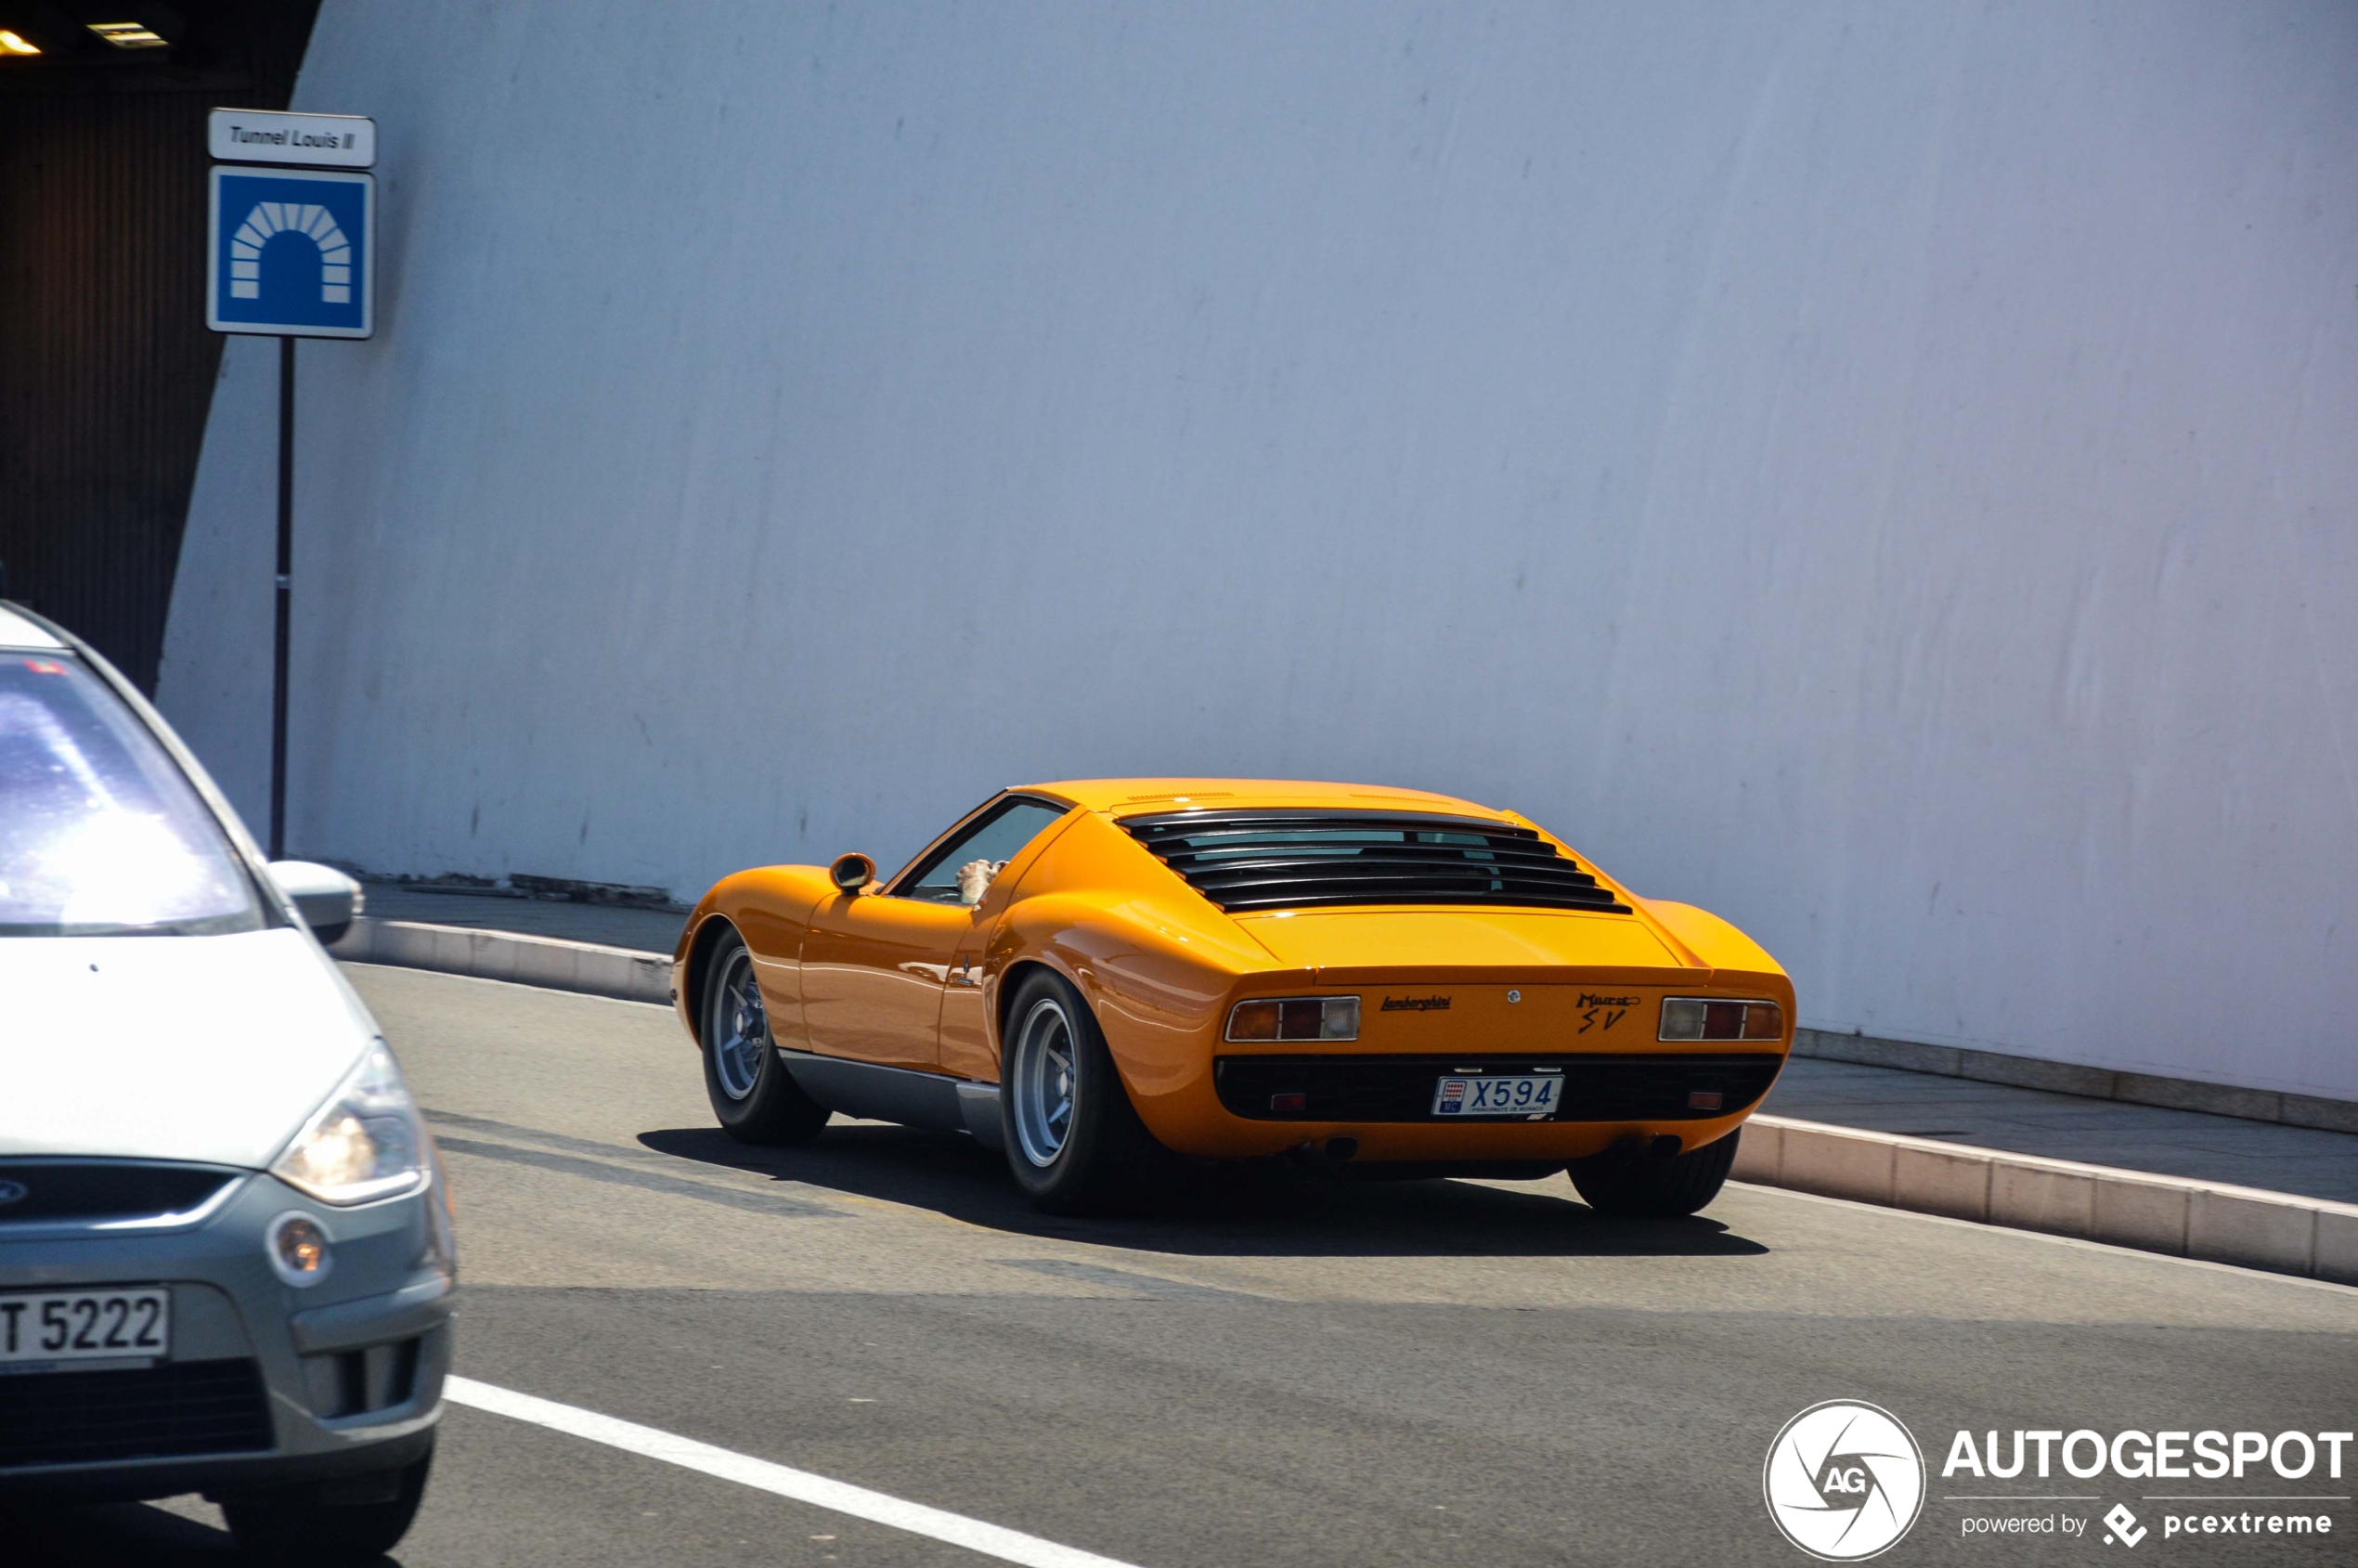 This Lamborghini has been a resident of Monaco for years